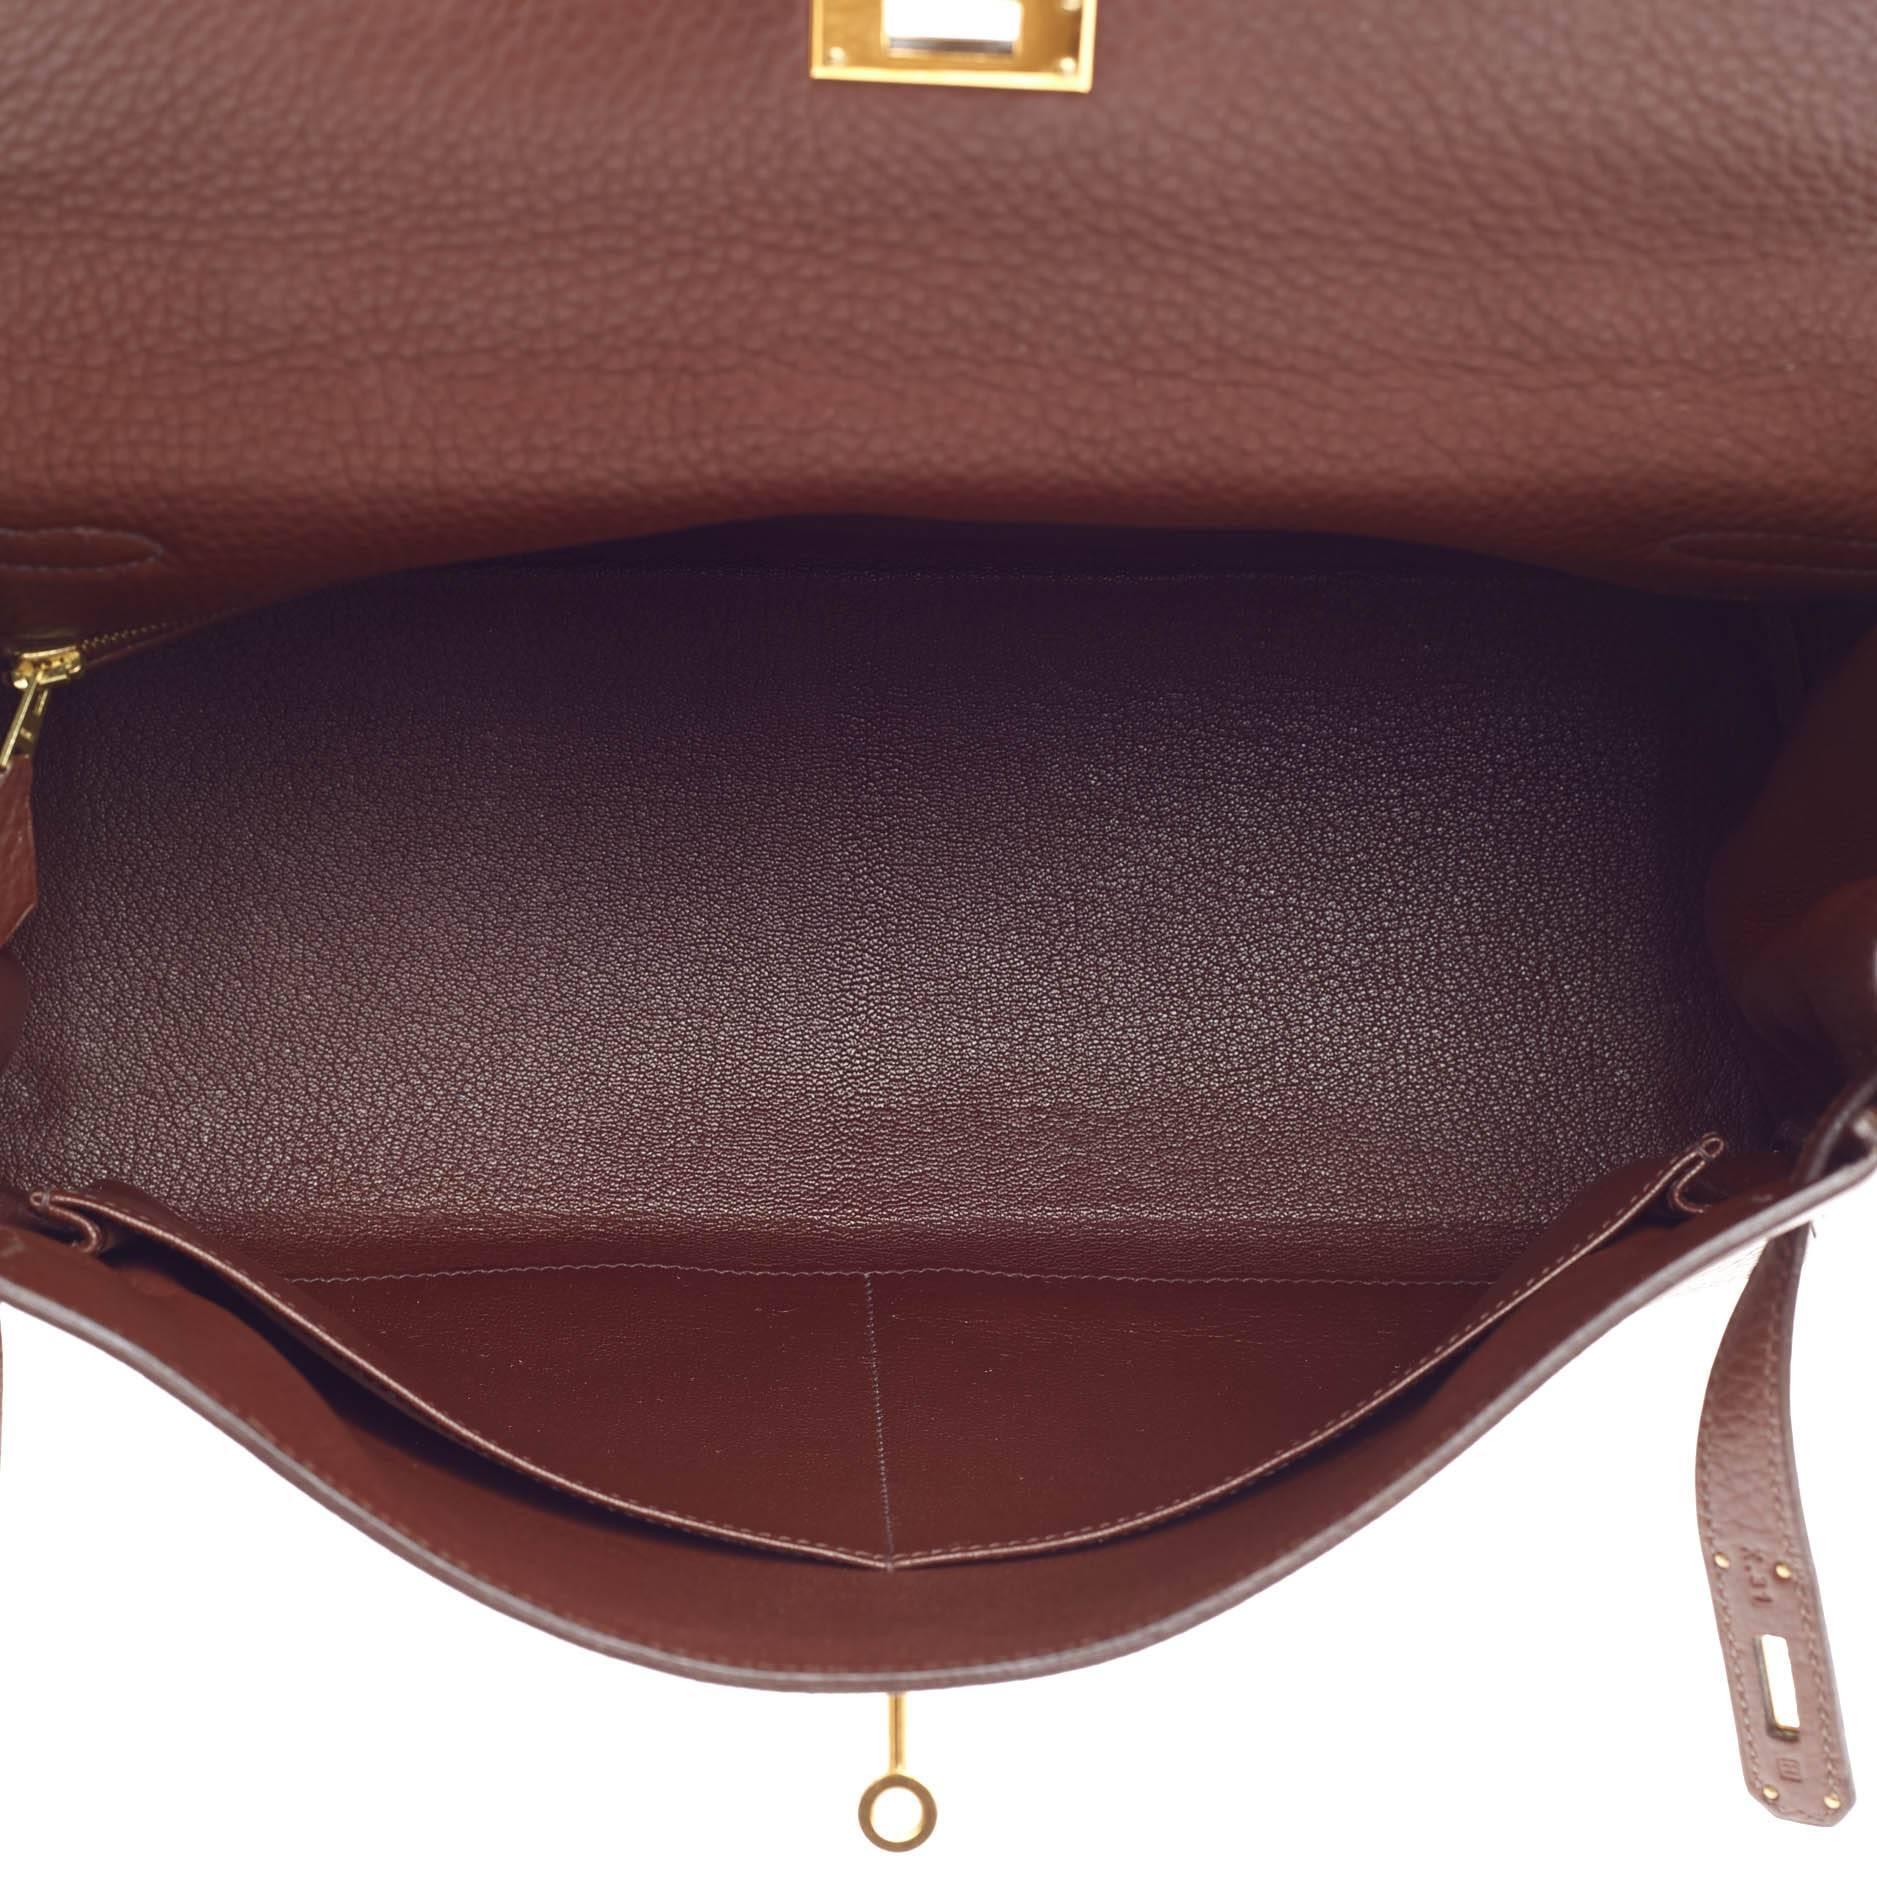 Hermes Kelly Chocolate Clemence with Gold Hardware 35 2